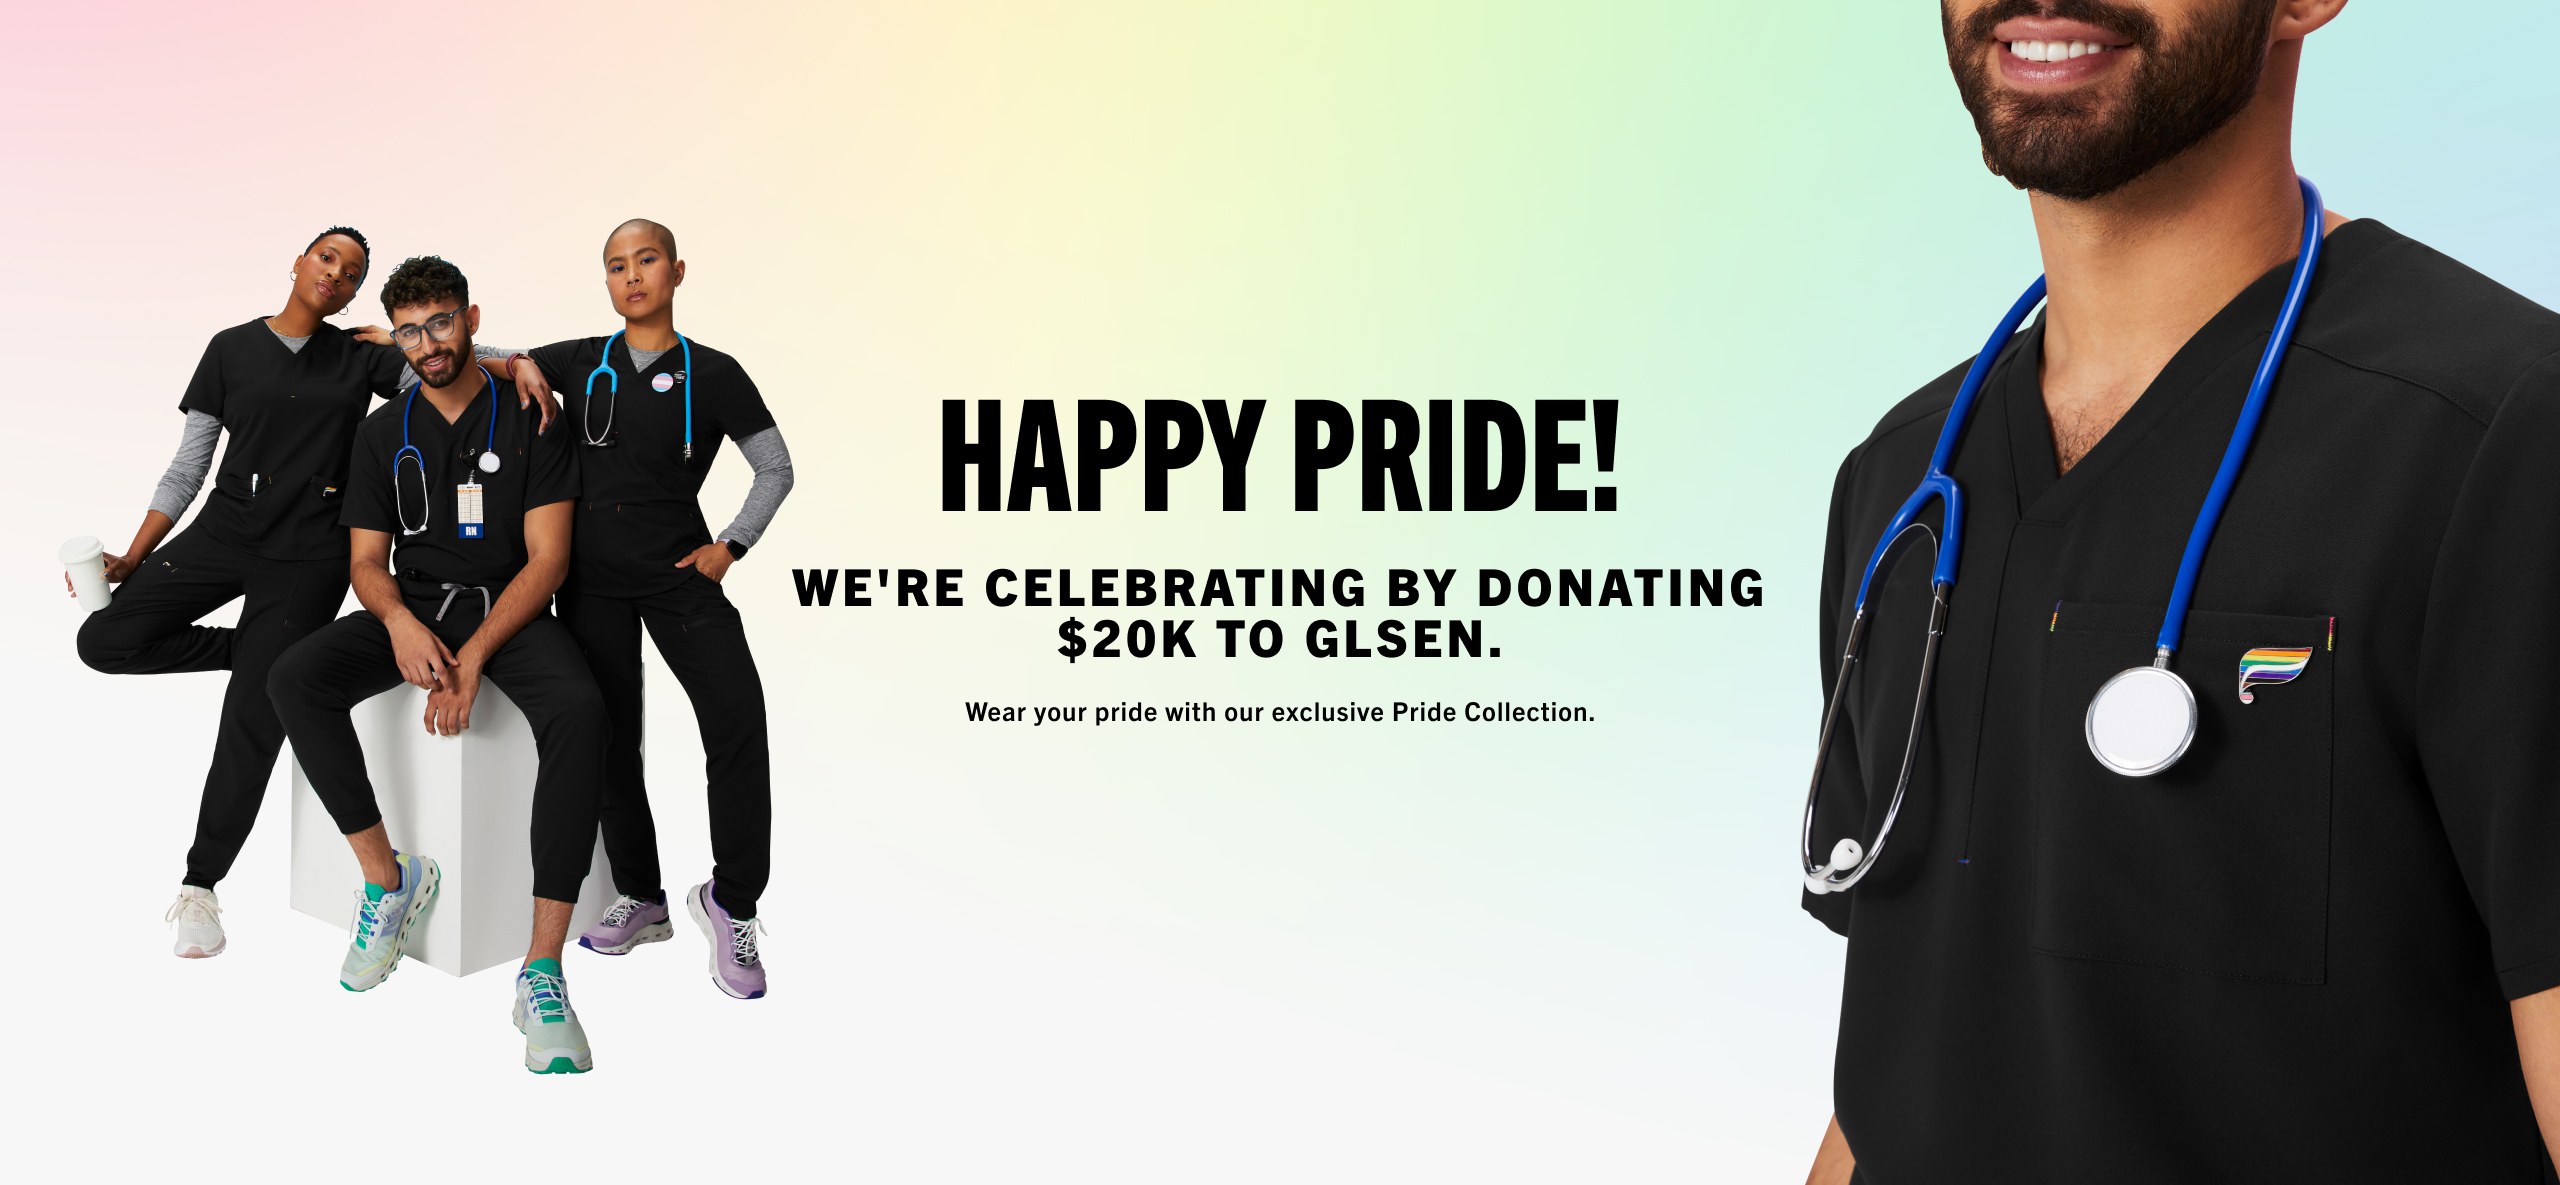 Happy Pride! We're celebrating by donating $20K to GLSEN. Wear your Pride with our exclusive Pride collection. Take the quiz to shop.